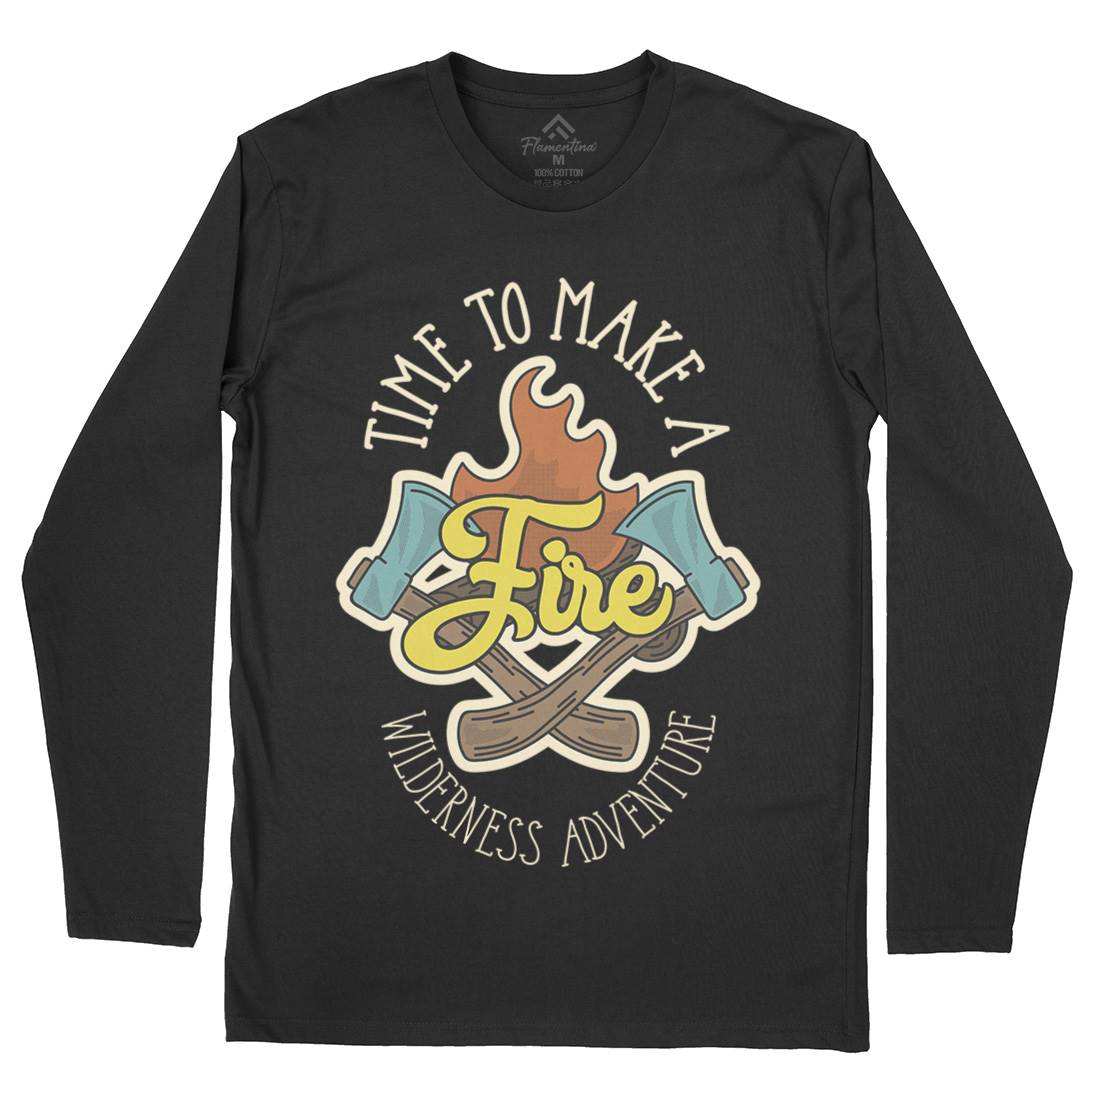 Time To Make Fire Mens Long Sleeve T-Shirt Nature D992